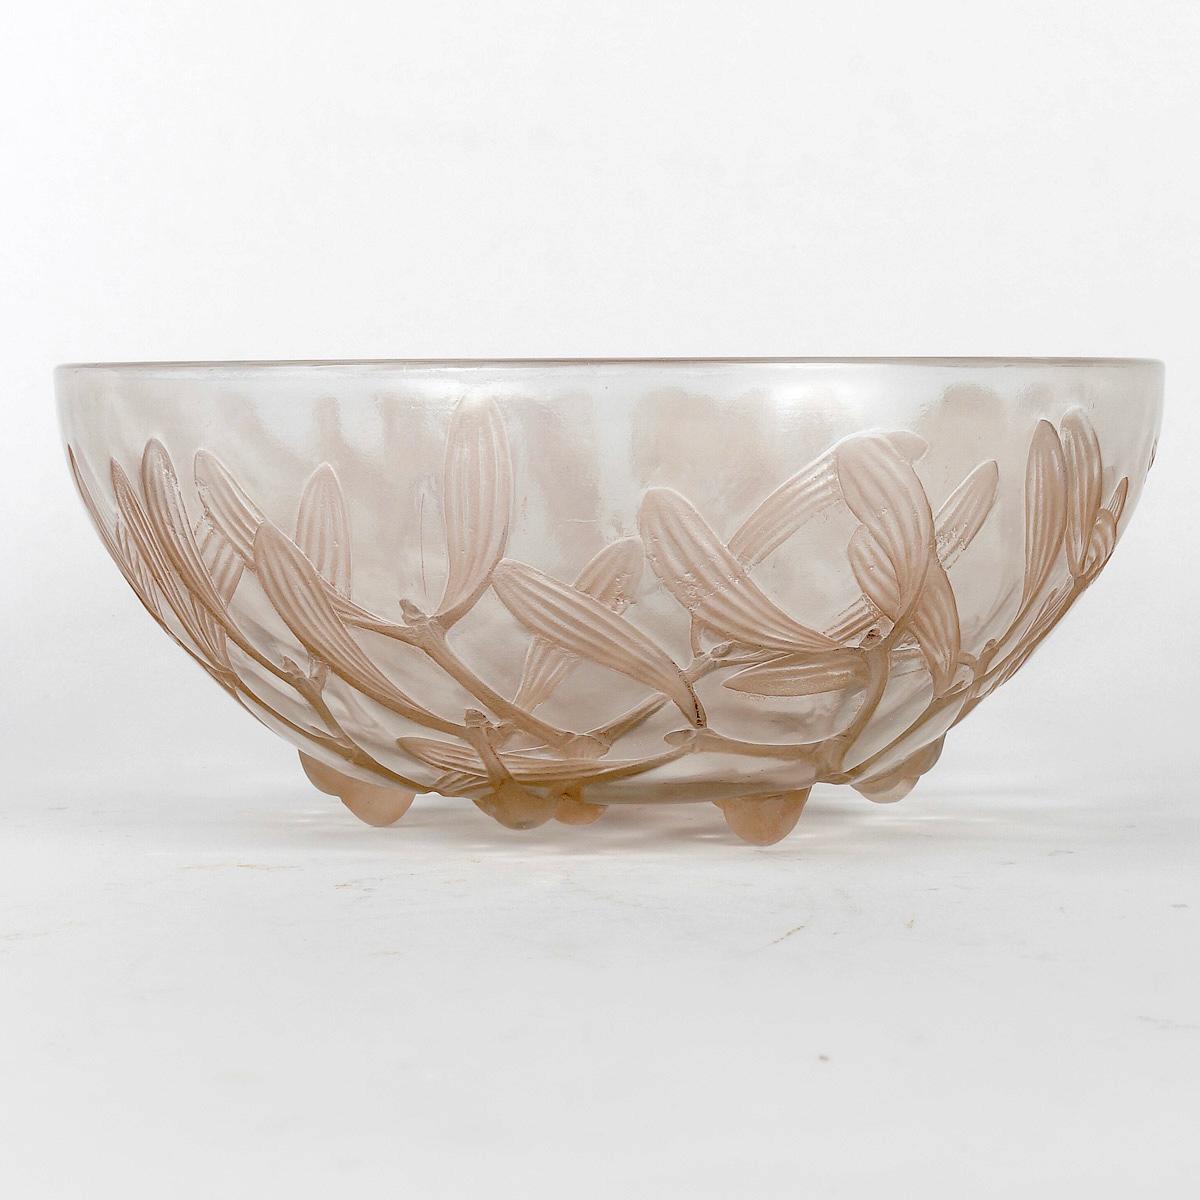 French 1921 René Lalique -Bowl Gui Mistletoe Glass with Sepia Patina For Sale